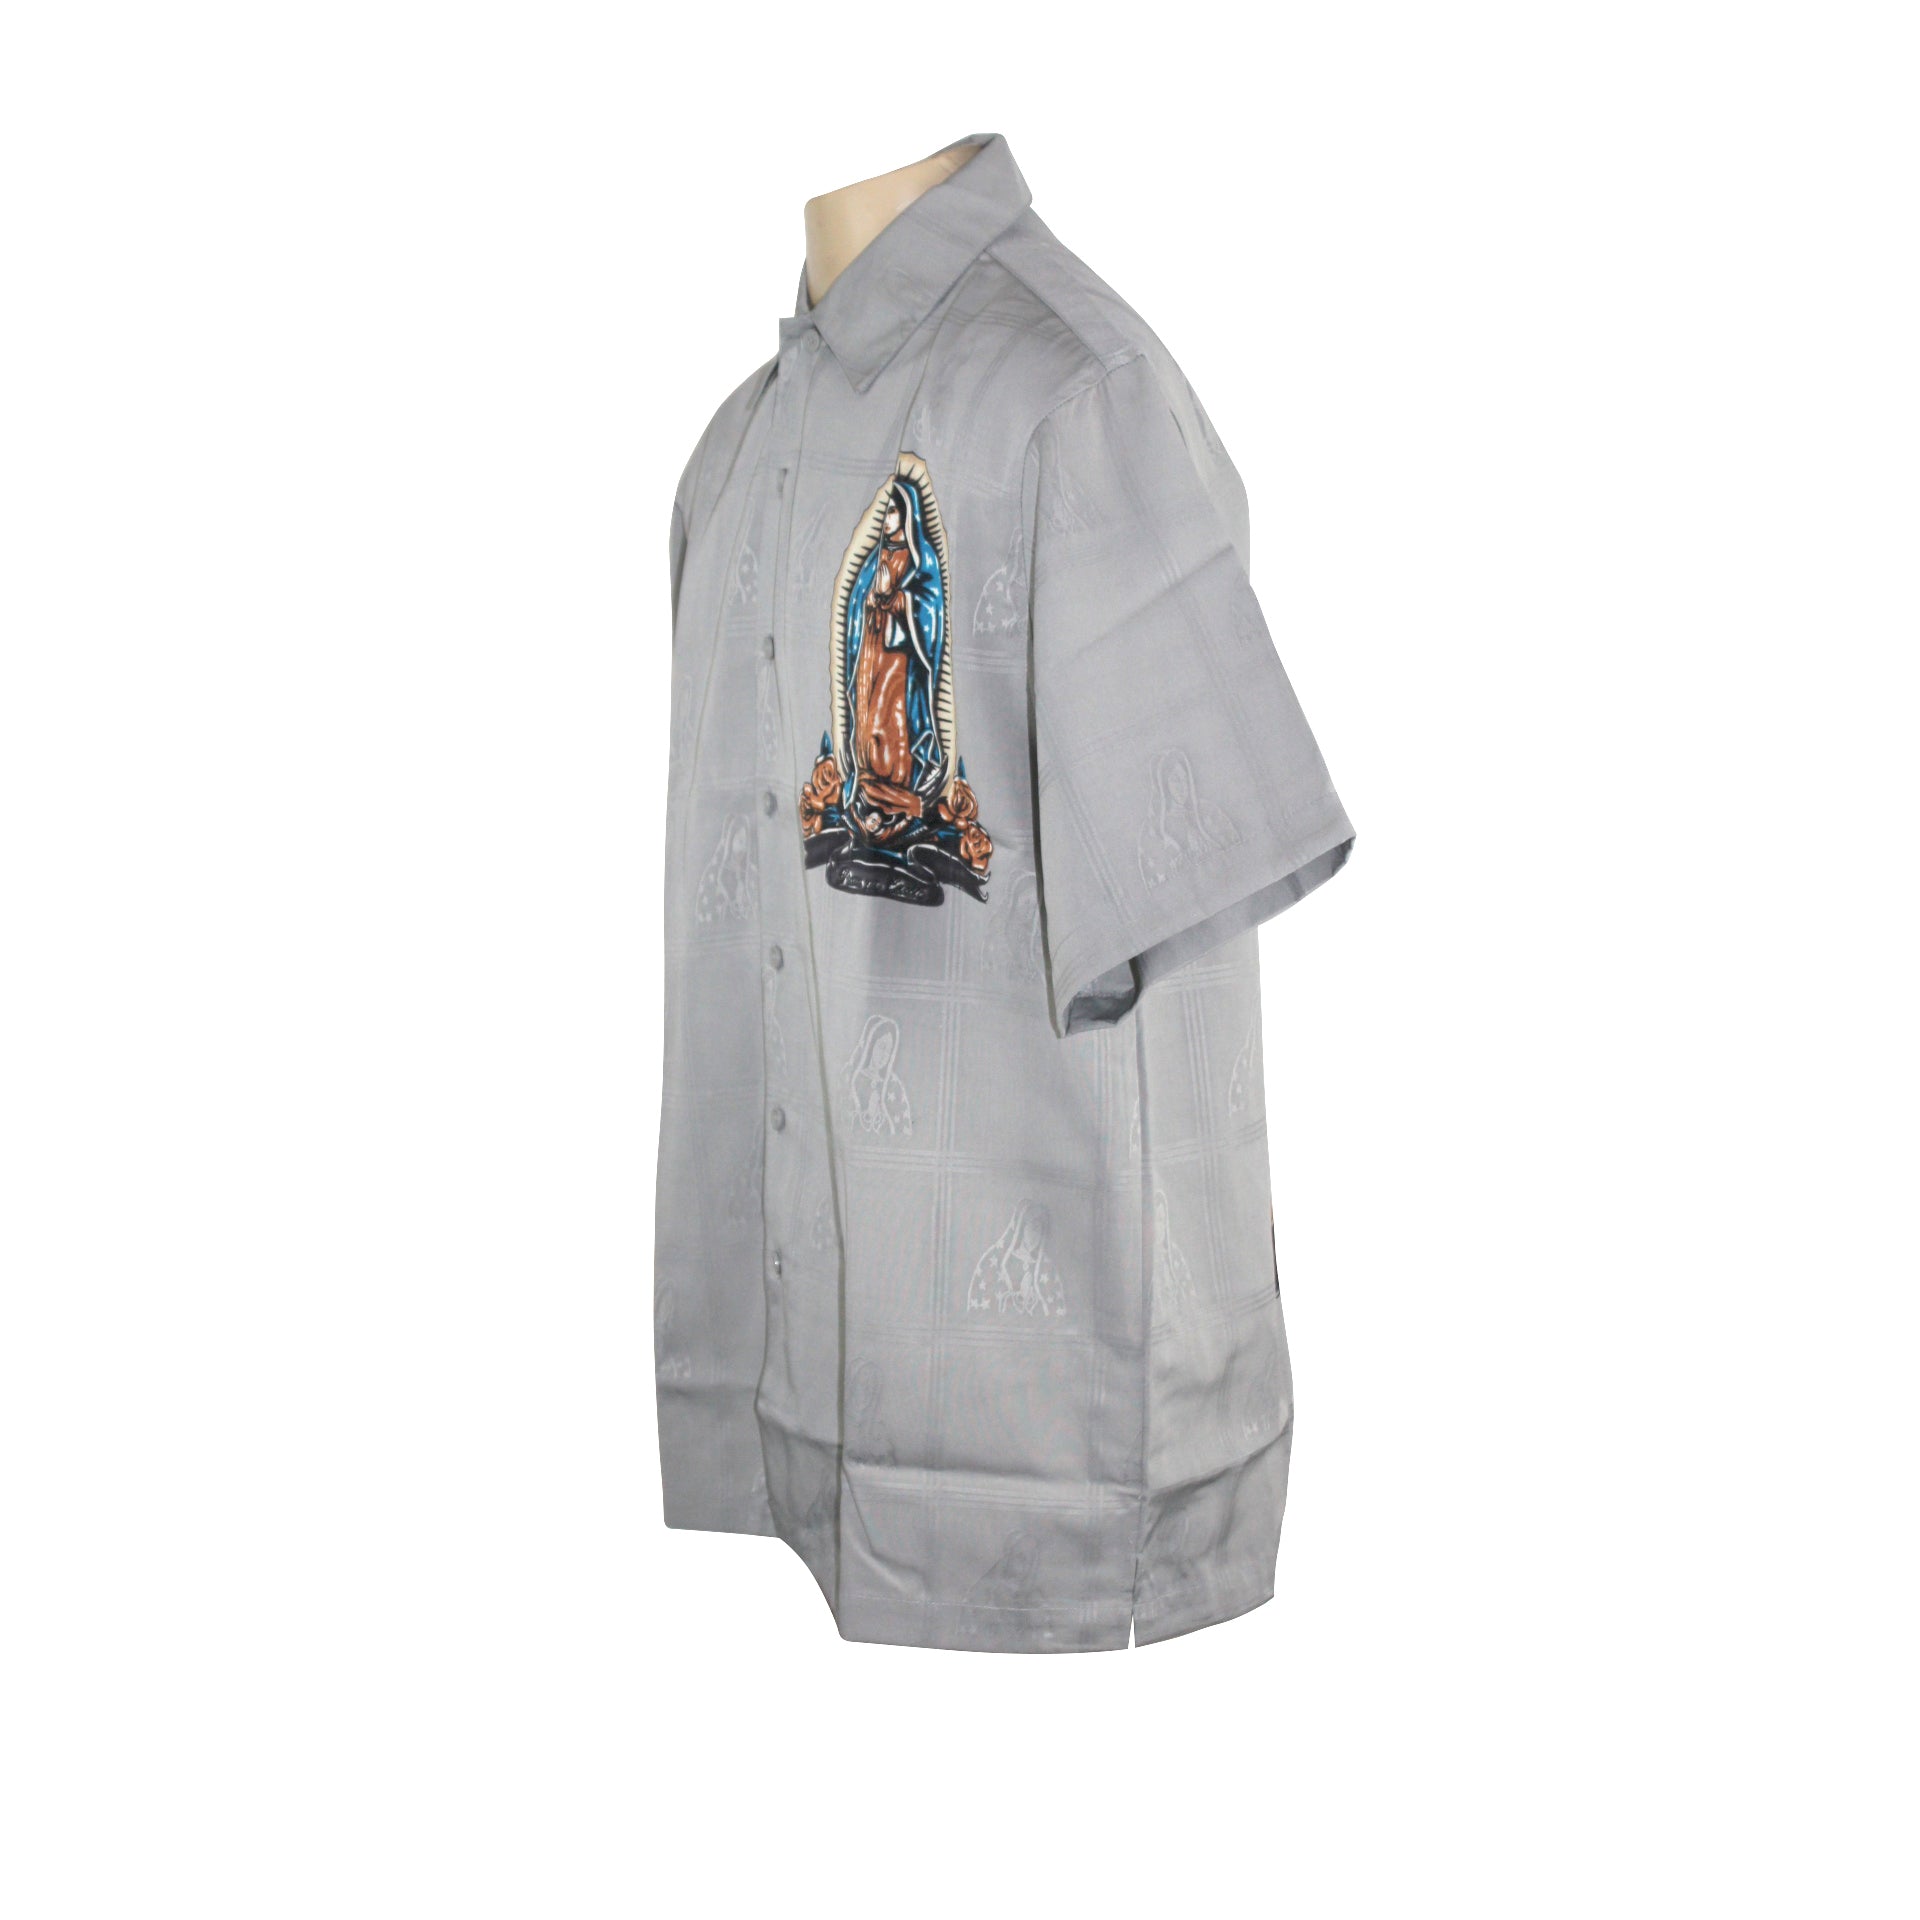 Men's Cruizin Low Virgin Mary Our Lady of Guadalupe Buttom-up Shirt